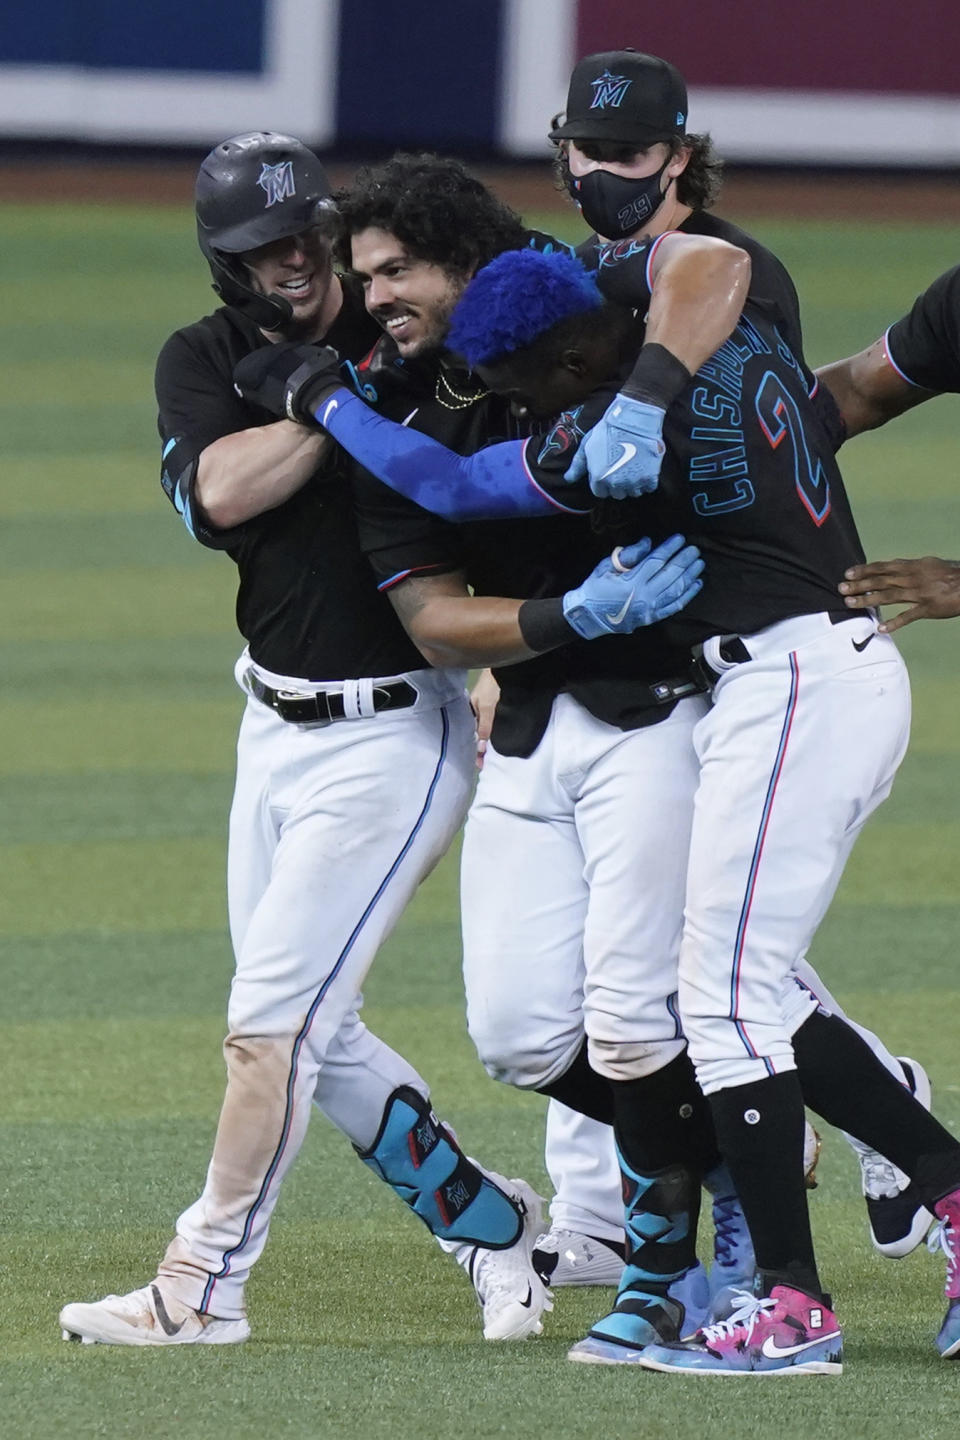 Miami Marlins' Jorge Alfaro, center, is congratulated after he hit a double in the 10th inning to drive in the winning run in the team's baseball game against the San Francisco Giants, Saturday, April 17, 2021, in Miami. The Marlins won 7-6. (AP Photo/Marta Lavandier)